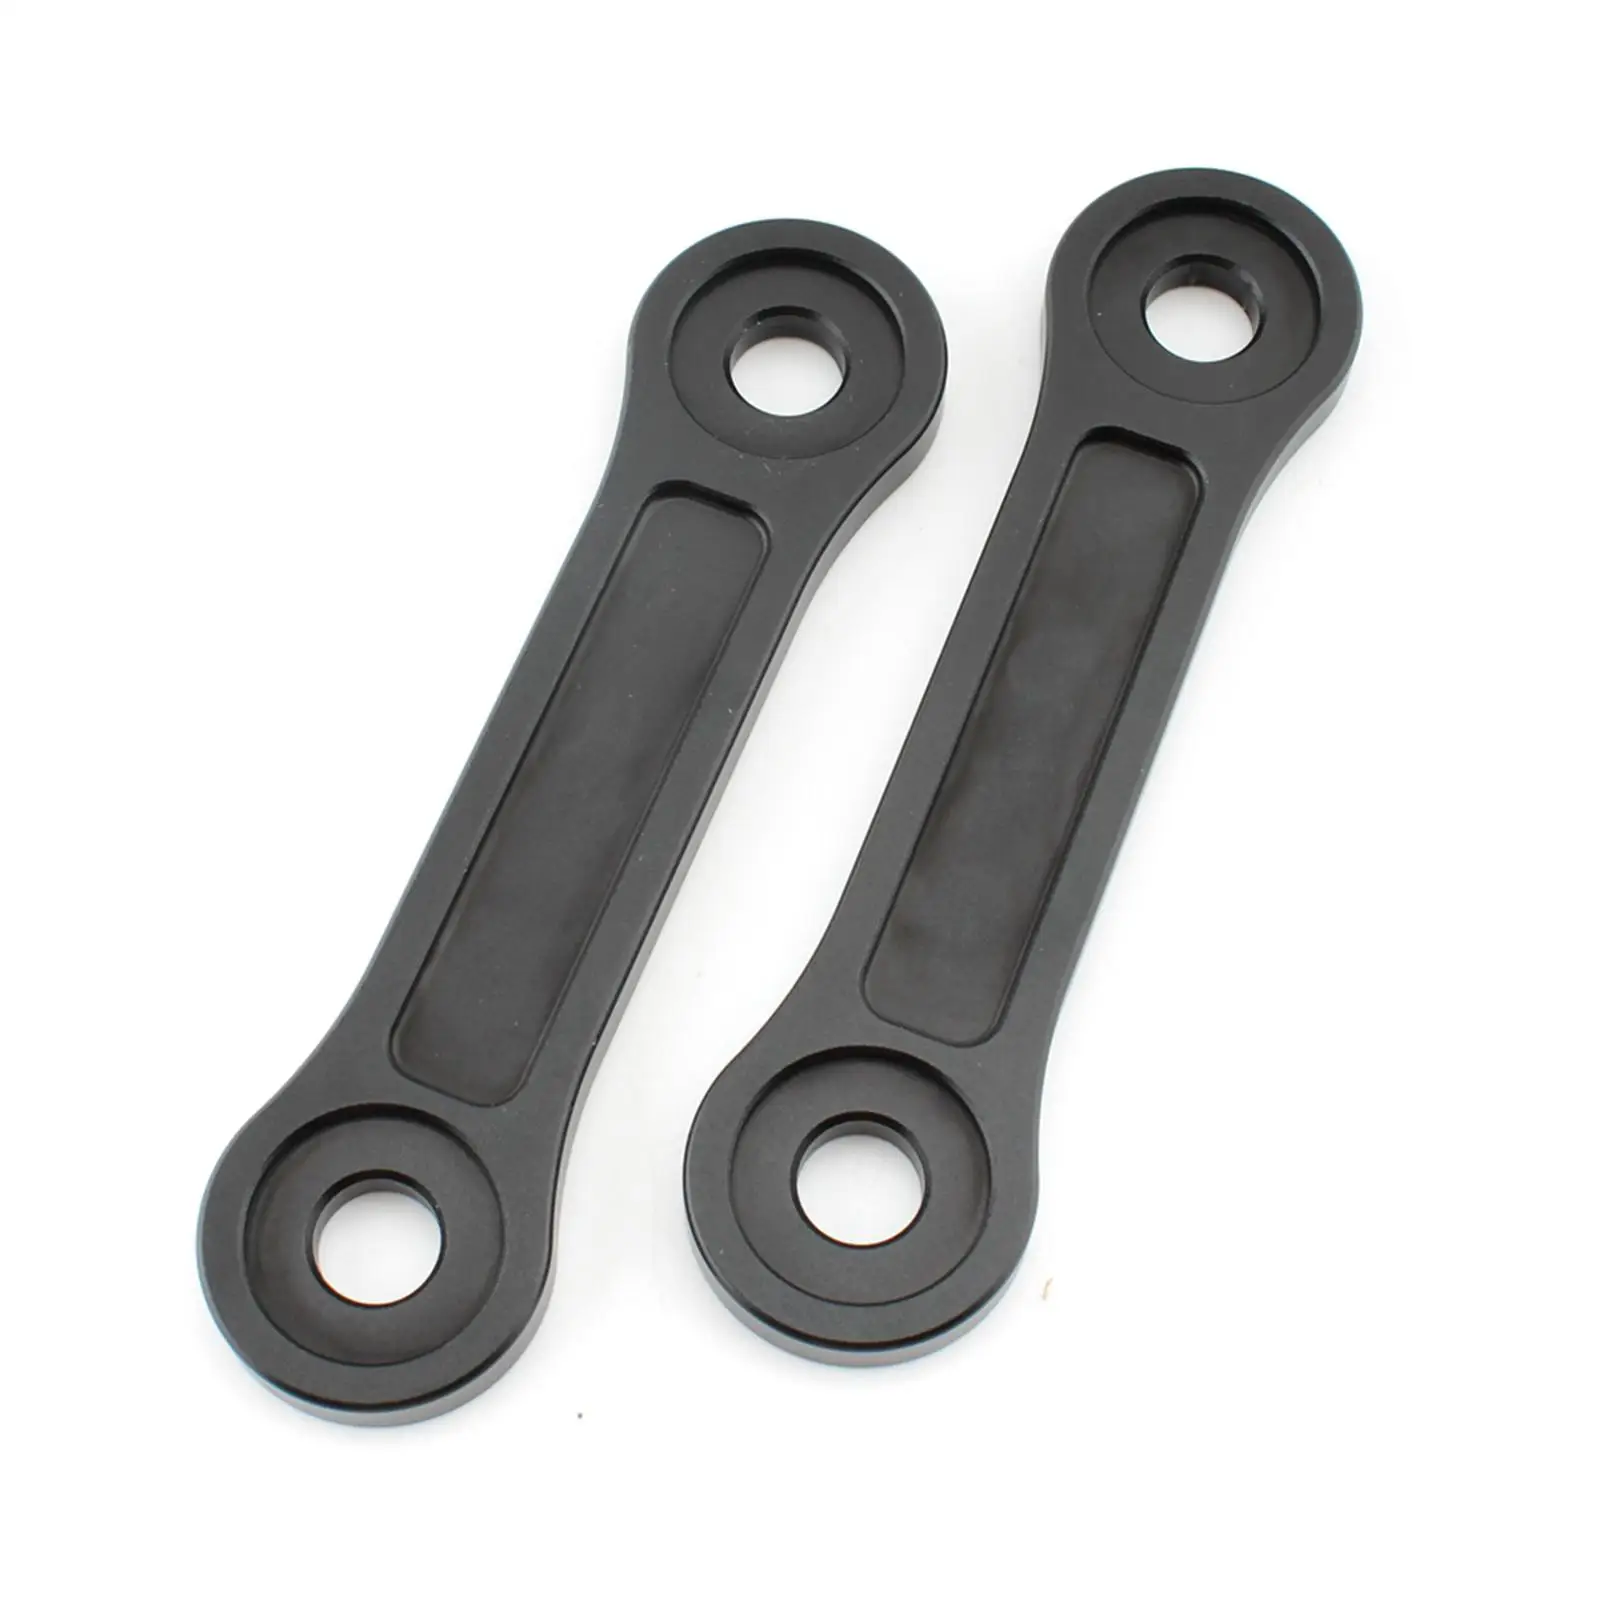 2Pcs Motorcycle Suspension Lowering Links Kit Reinforced Durable Linkage Drop Link Kit for Tiger 1200 GT Pro Rally Explorer